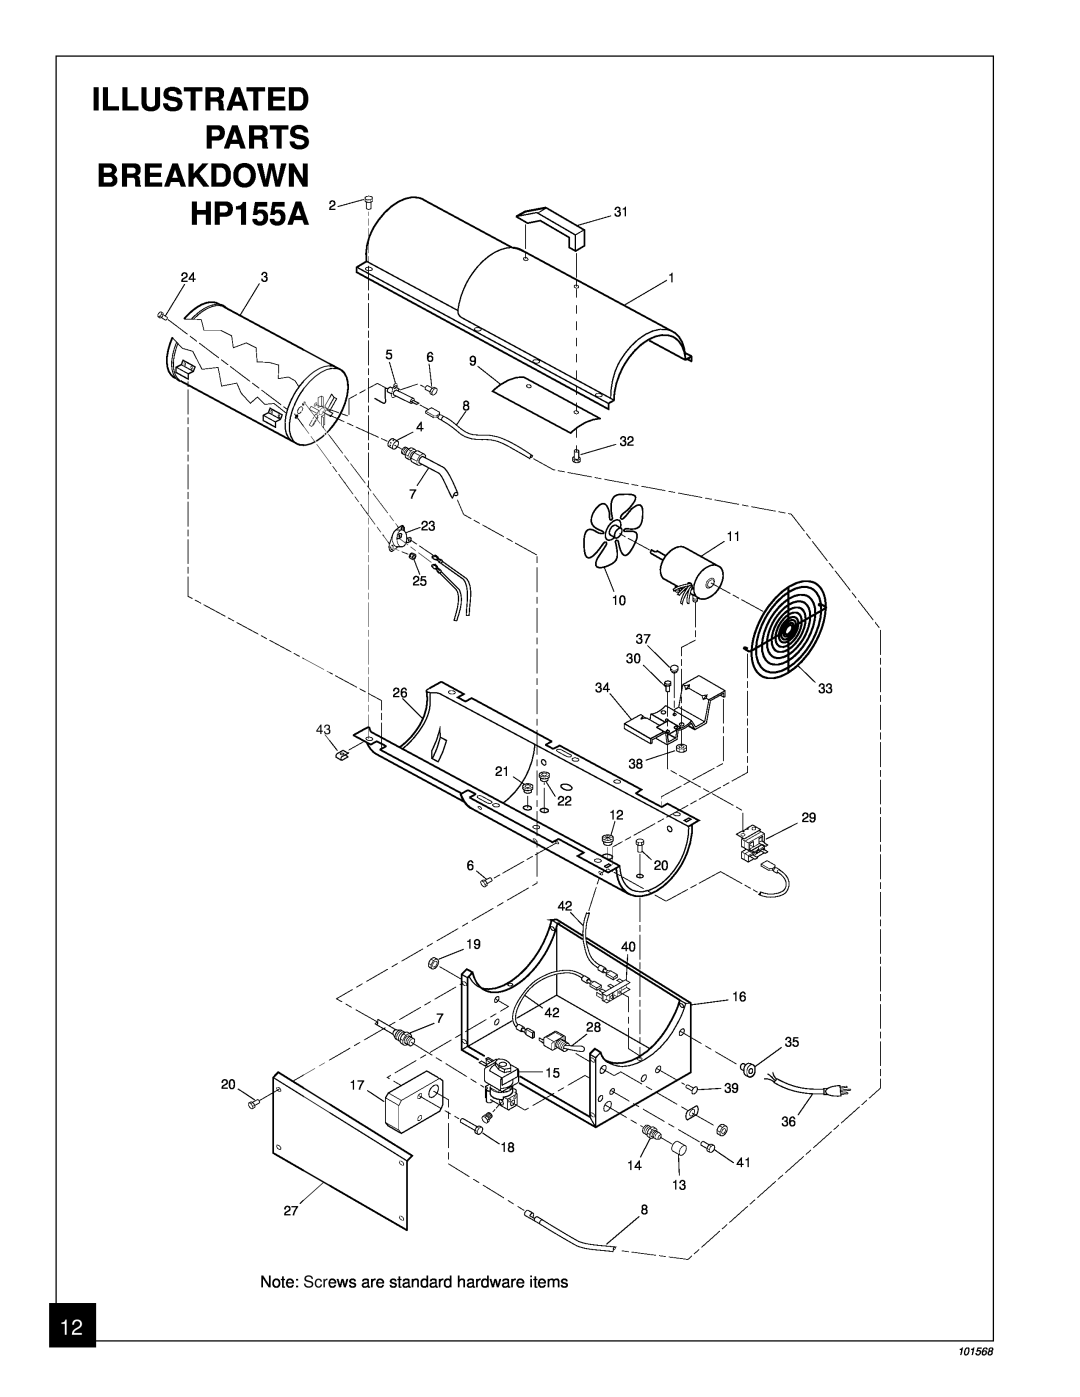 Homelite UT65052-A owner manual Illustrated, Parts, Breakdown, HP155A, Note Screws are standard hardware items 